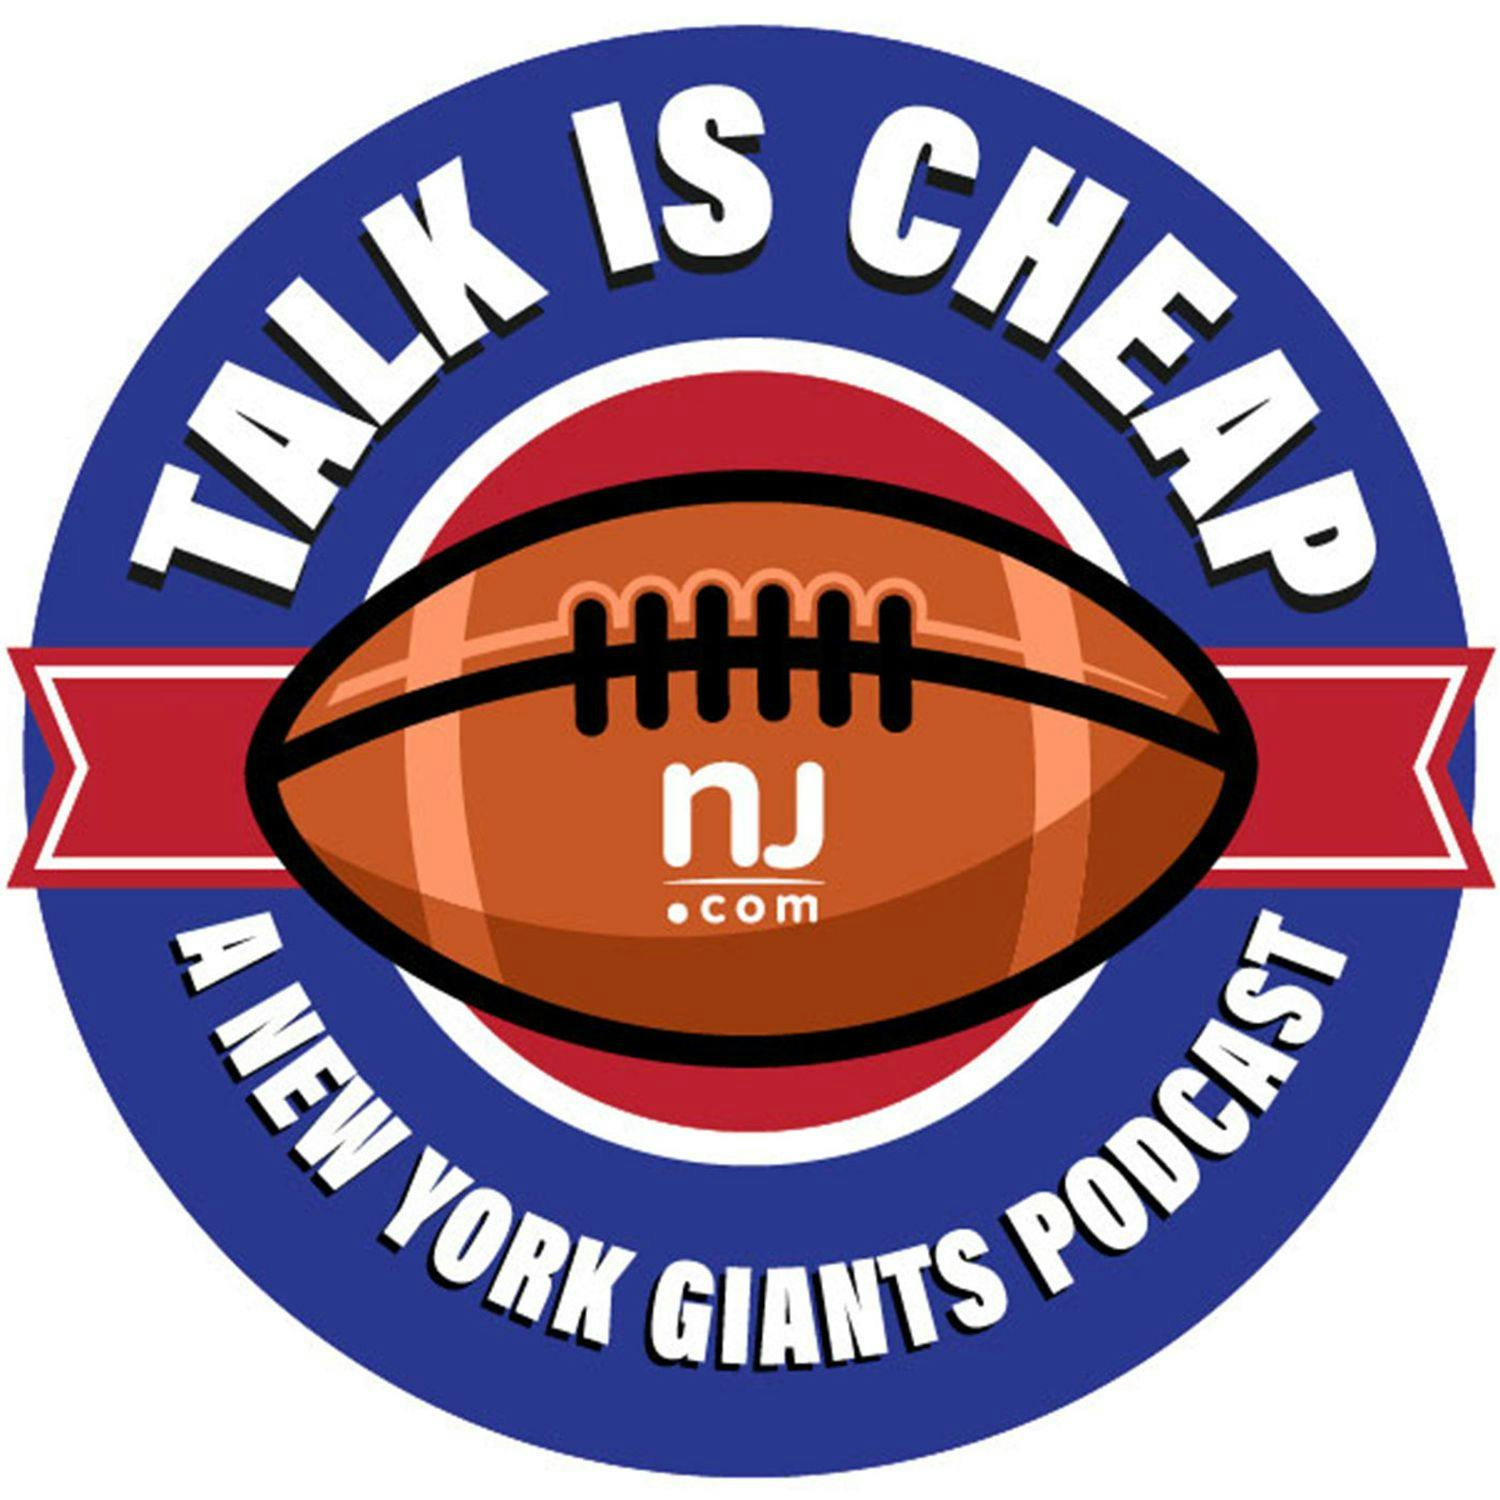 Giants are a mess, so will Joe Judge get fired? Evaluating the possibility